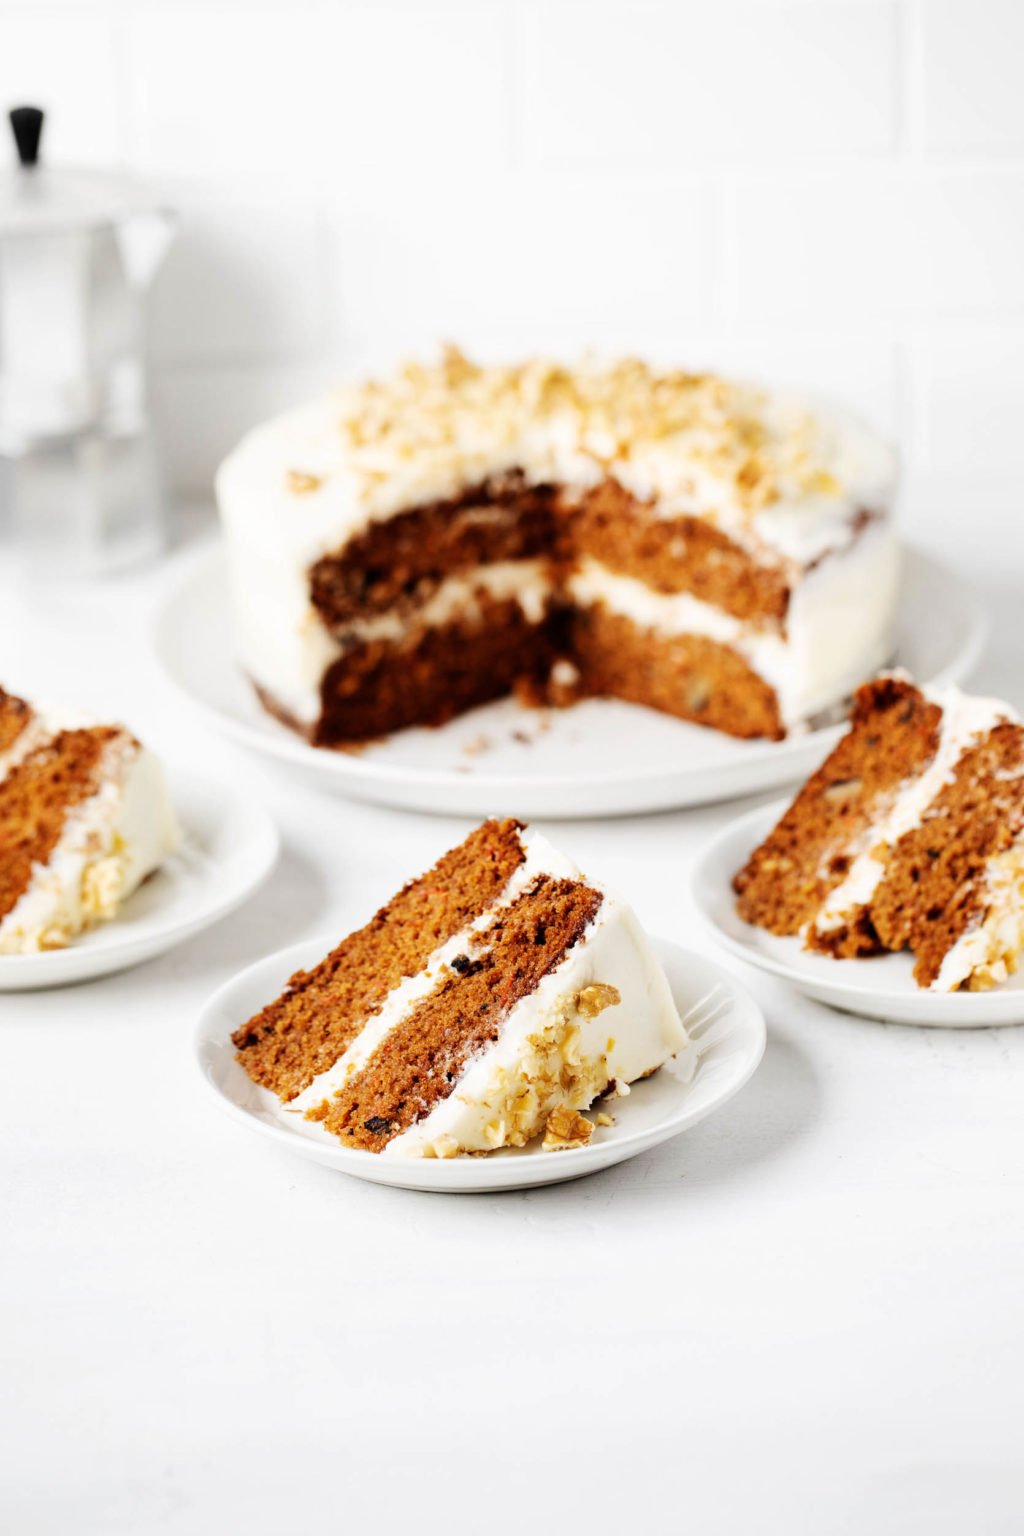 A vegan layered carrot cake is resting on a round platter. It has been sliced into three slices, which are each resting on small dessert plates against a white surface.